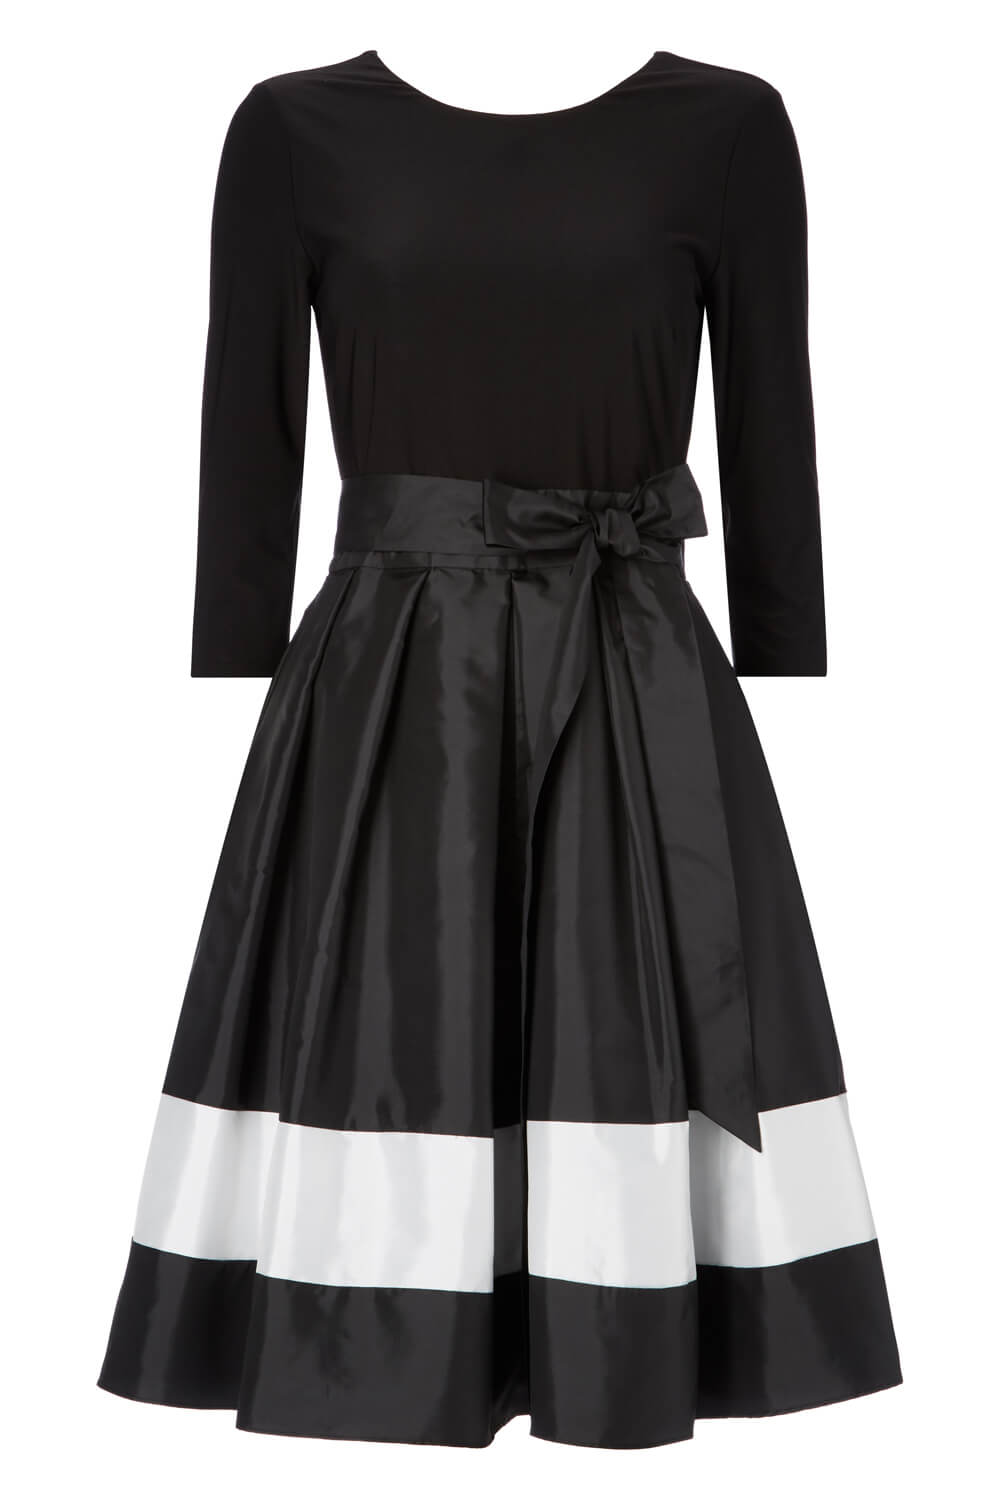 Black Contrast Fit and Flare Dress with Belt, Image 3 of 3